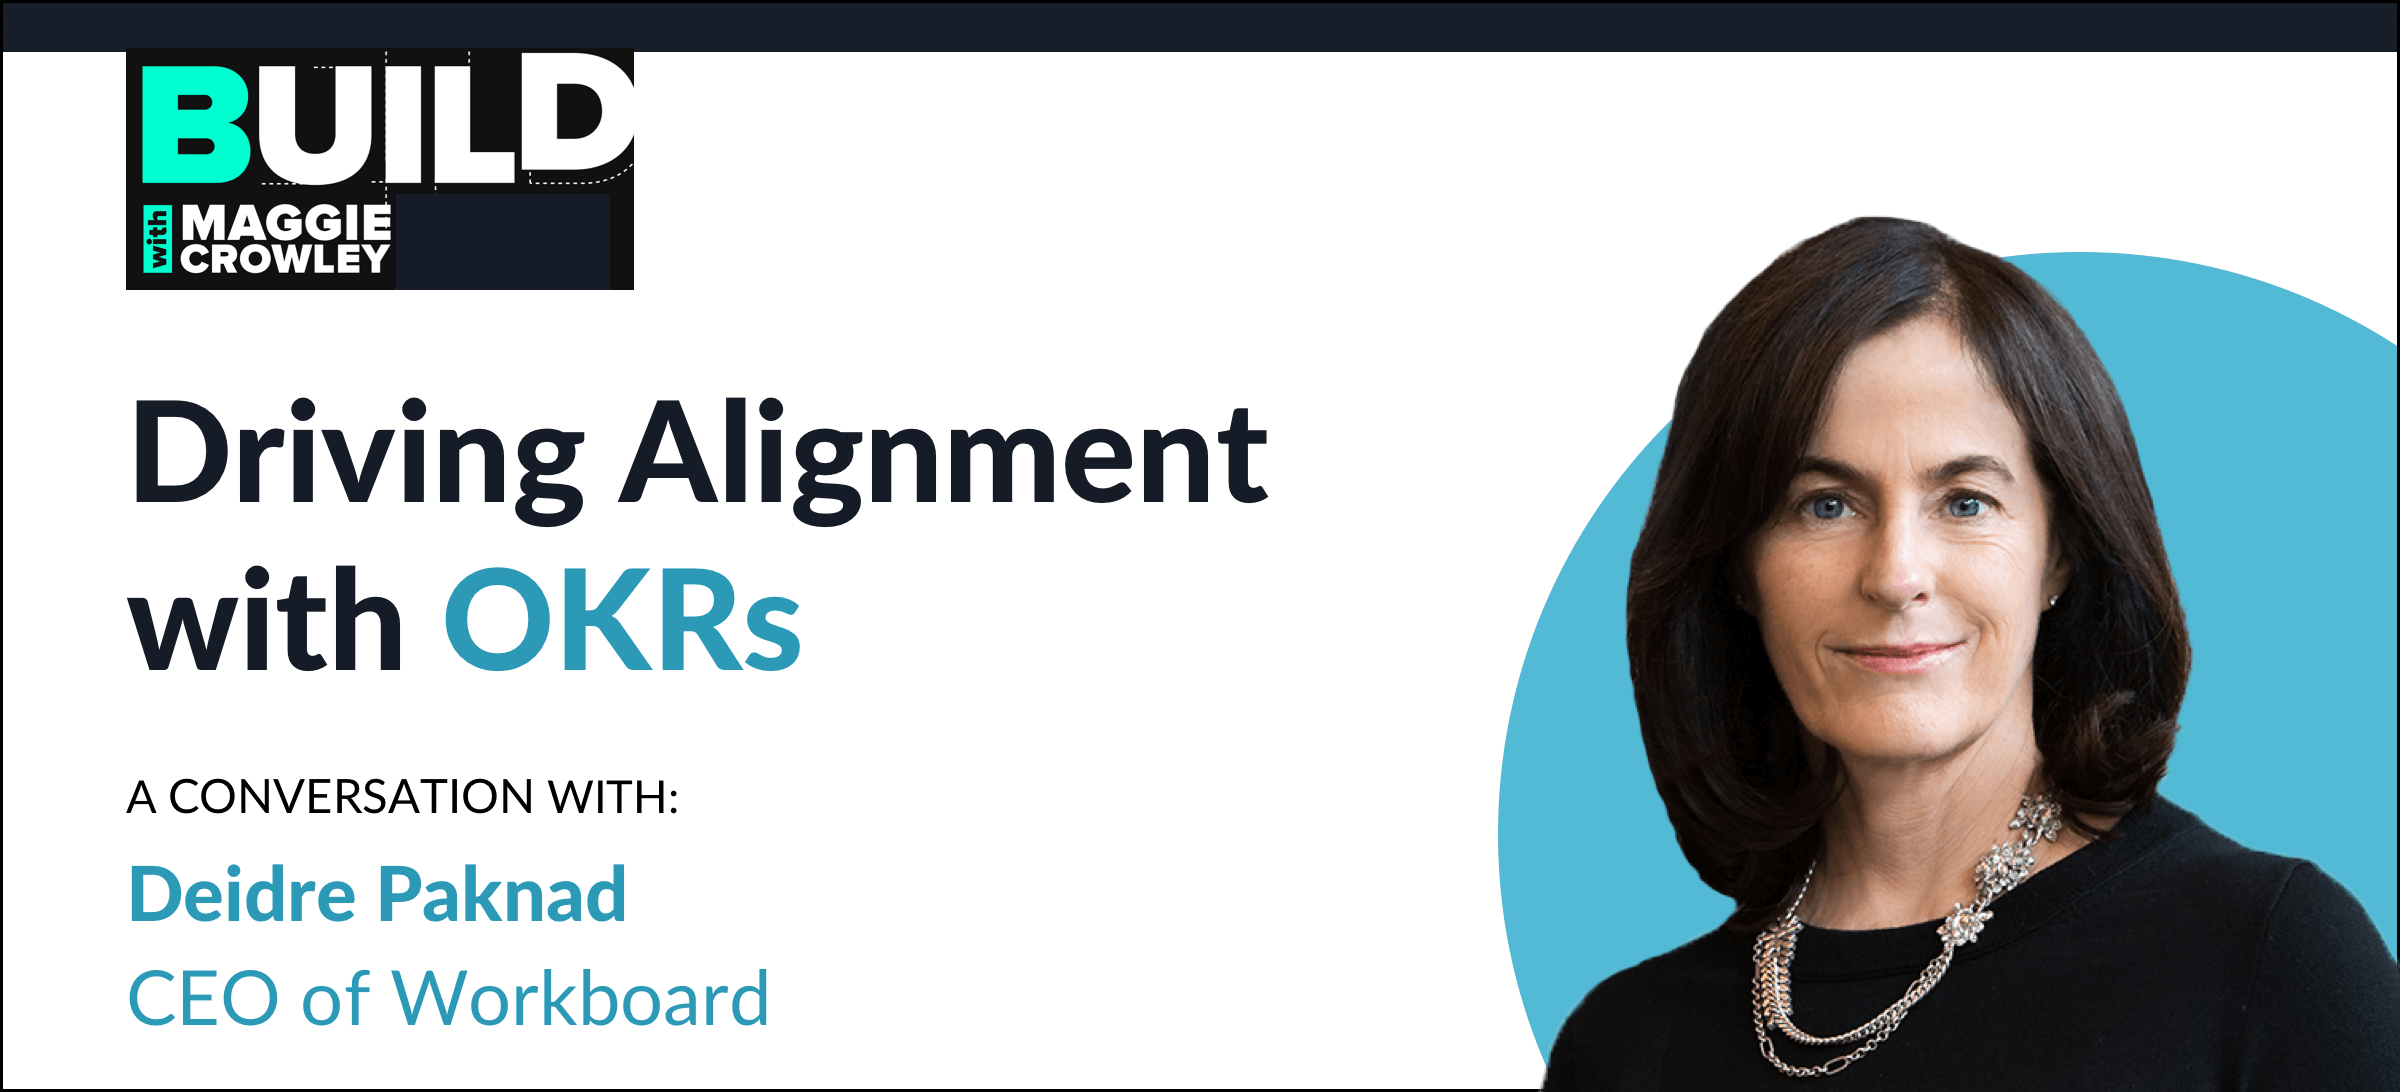 Driving Alignment with OKRs